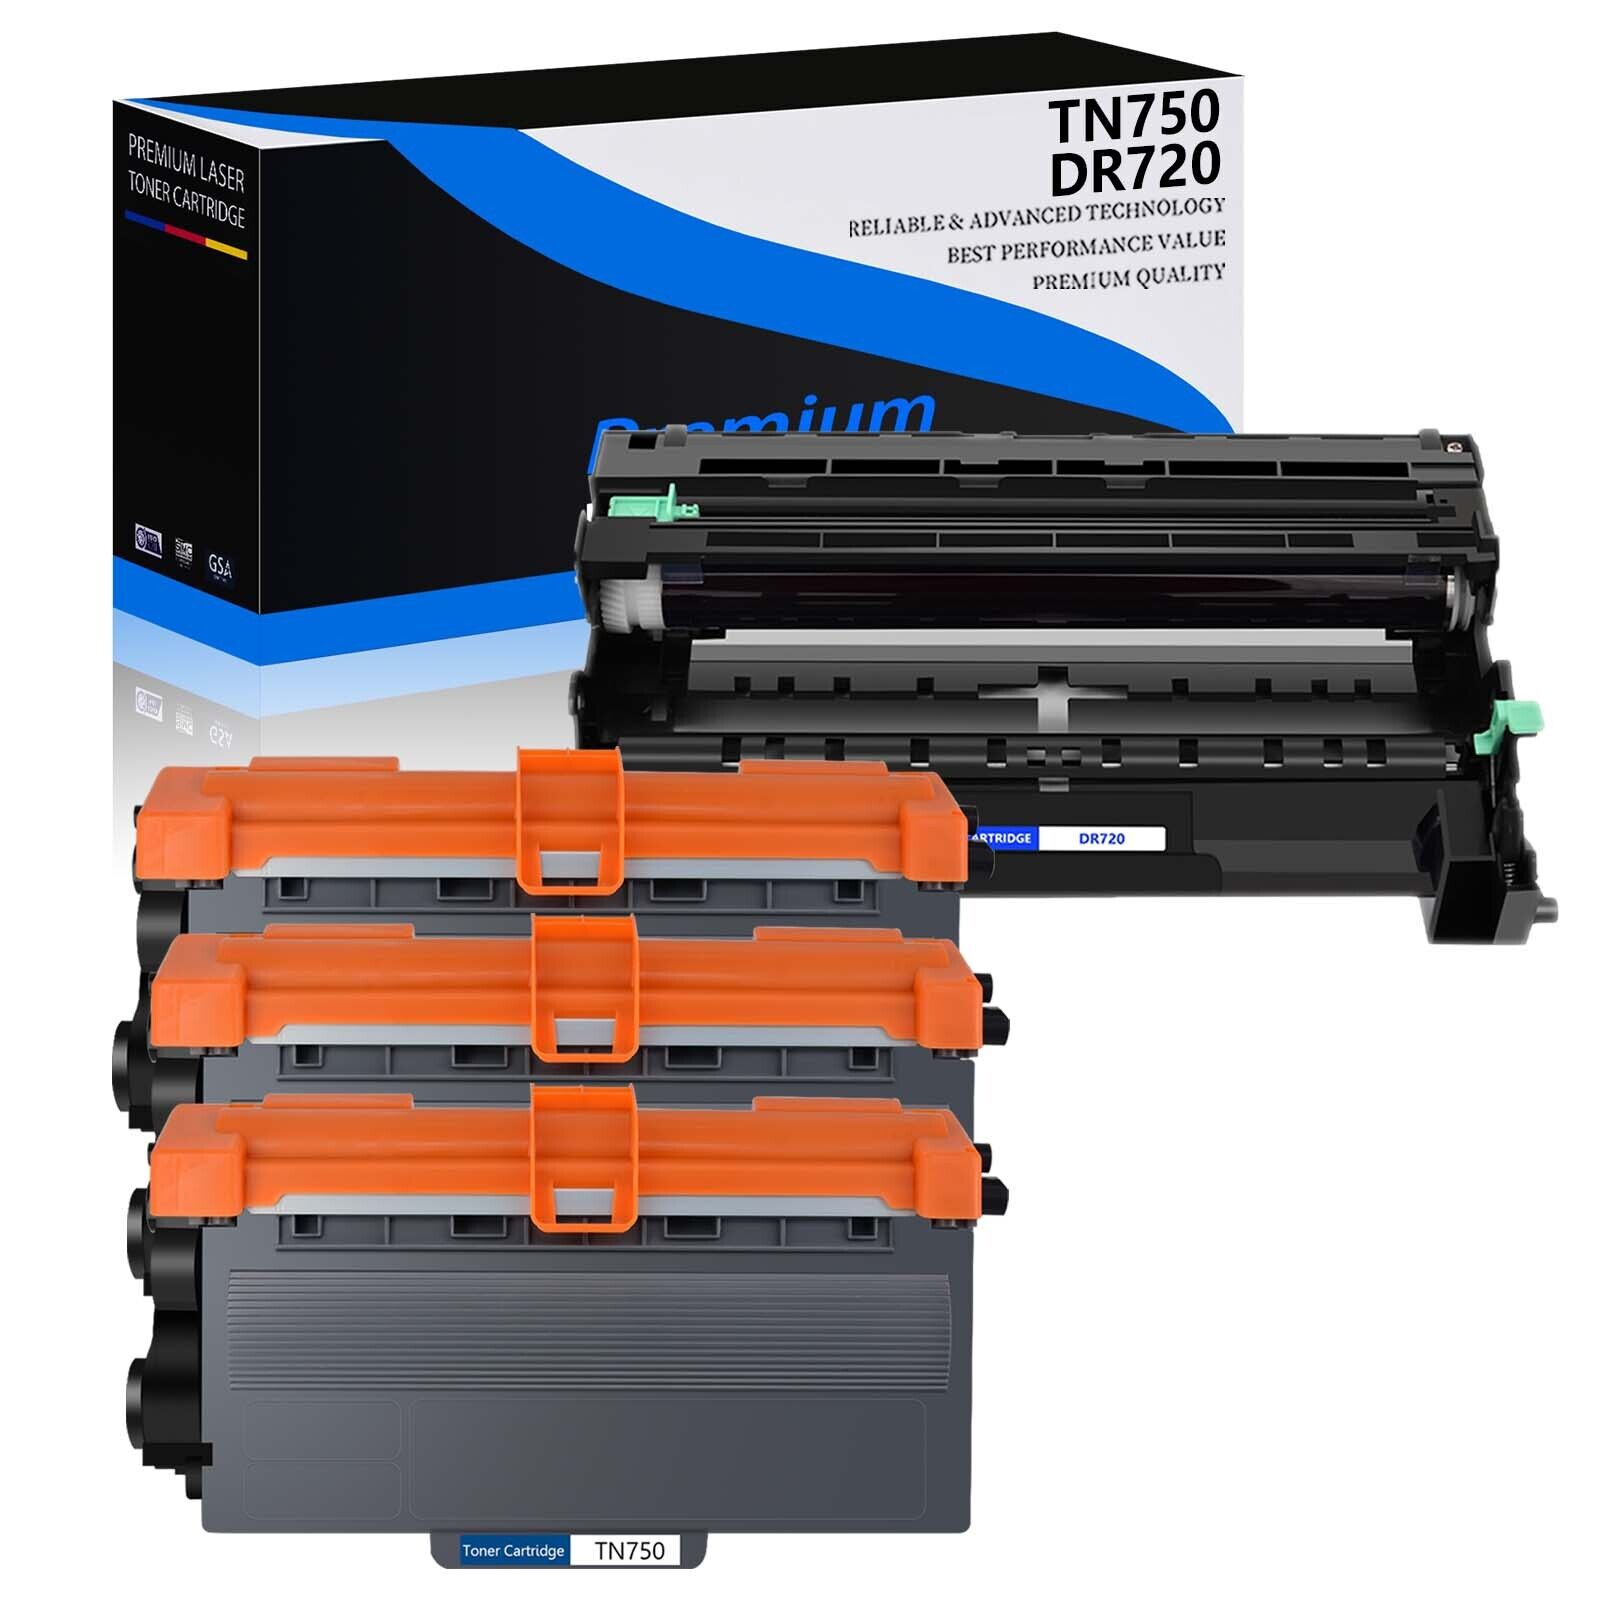 3x TN750 Toner +1x DR720 Drum Unit For Brother DCP-8150DN DCP-8155DN HL-6180DWT